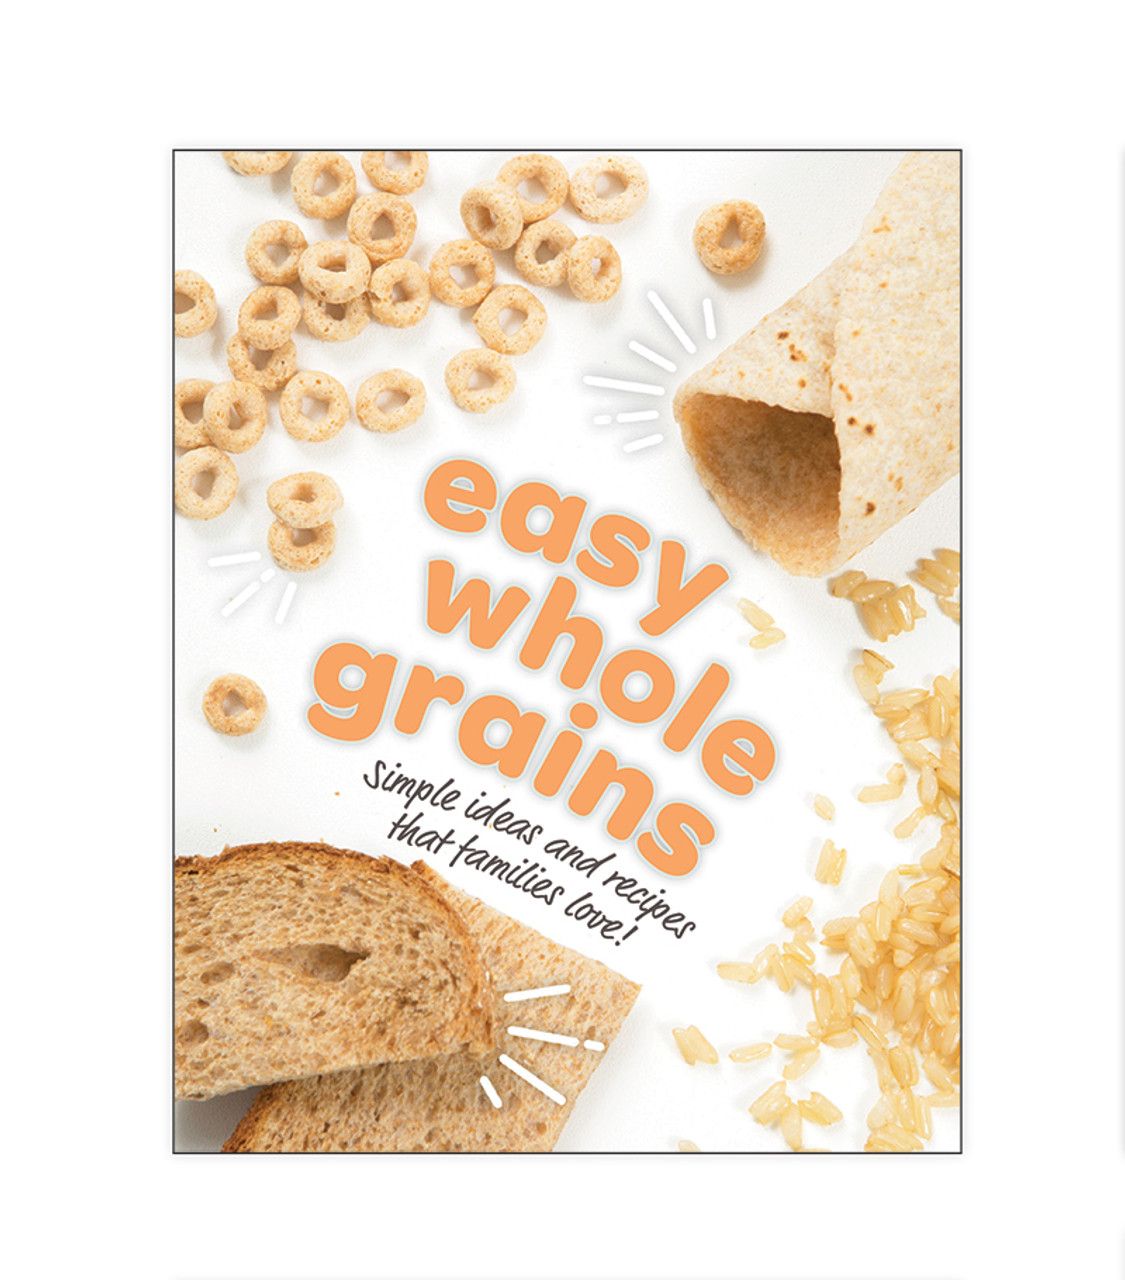 Discounted whole grain options